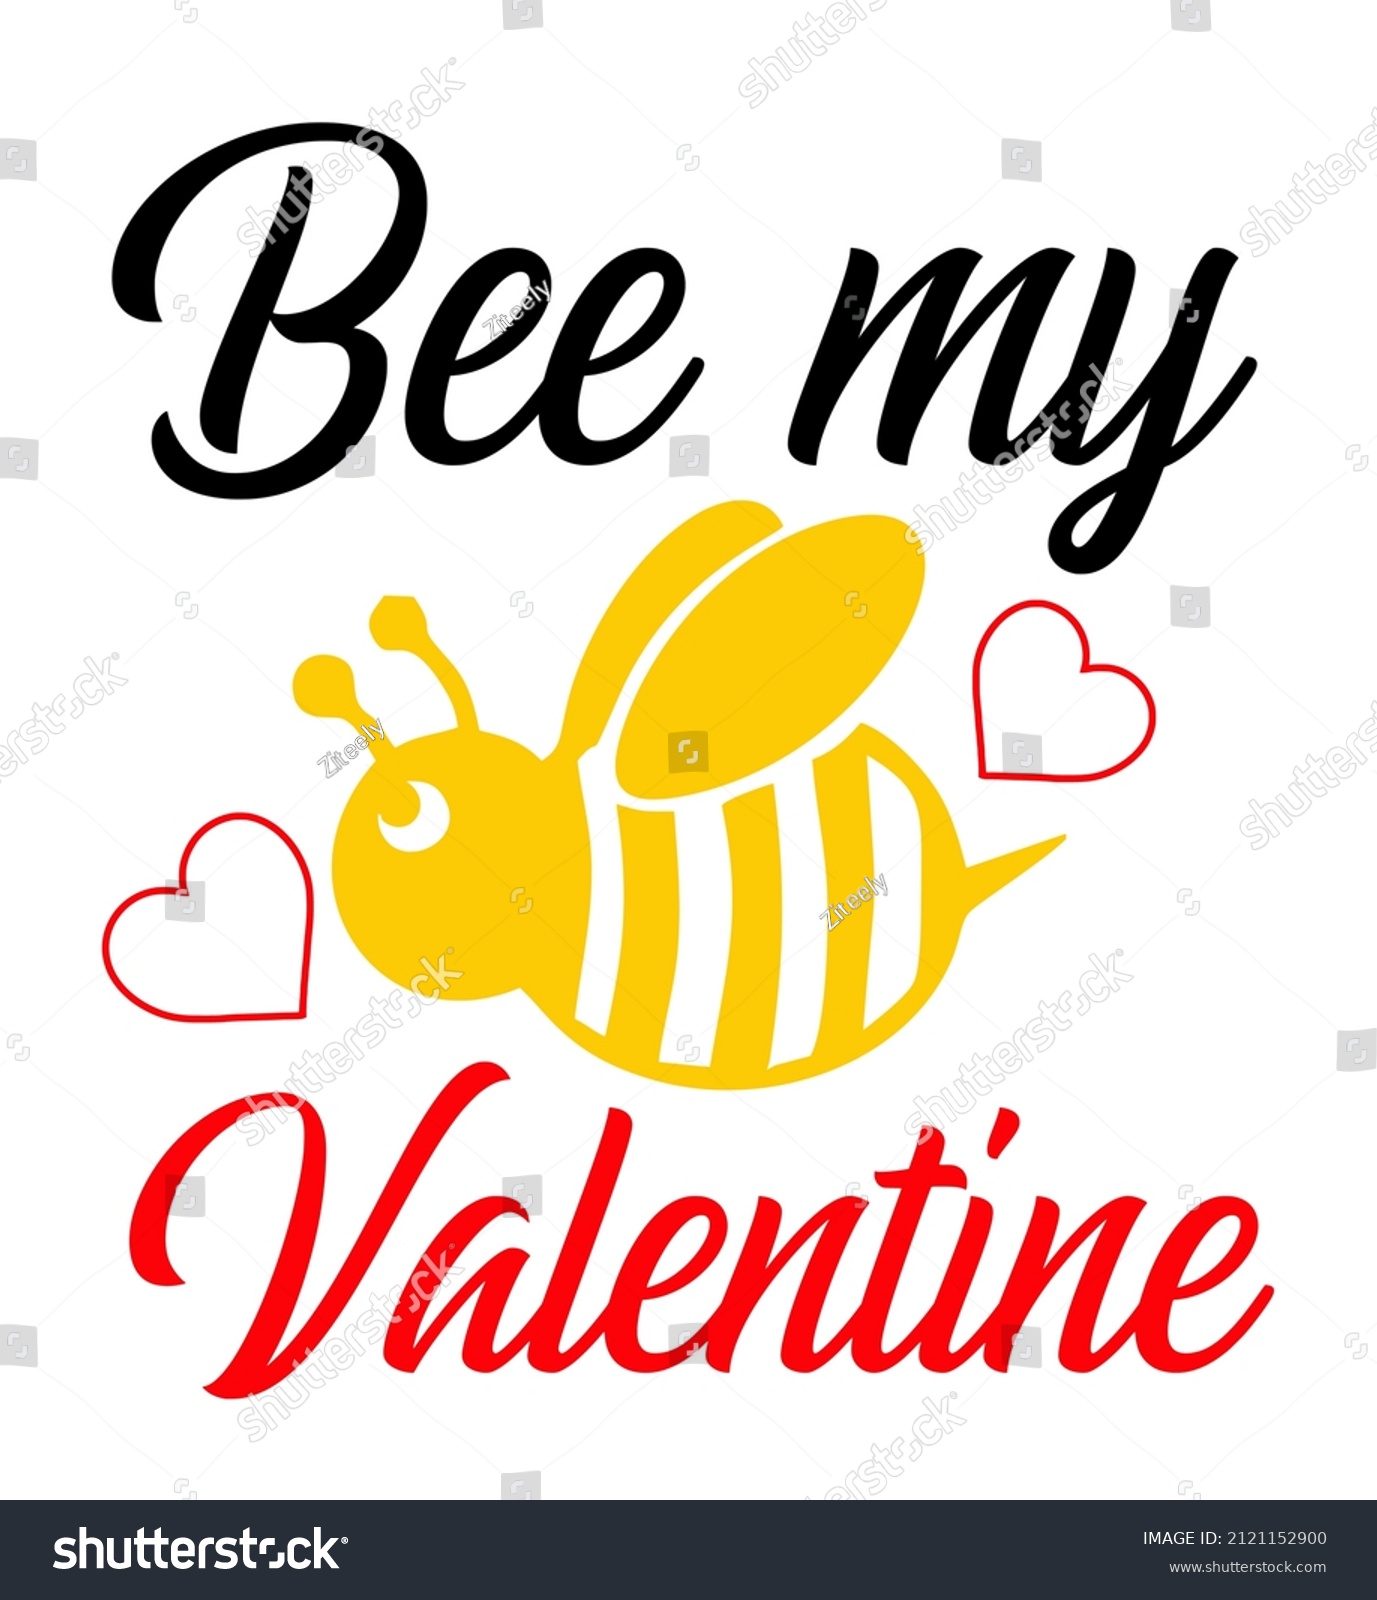 SVG of Bee My Valentine

Trending vector quote on white background for t shirt, mug, stickers etc. svg